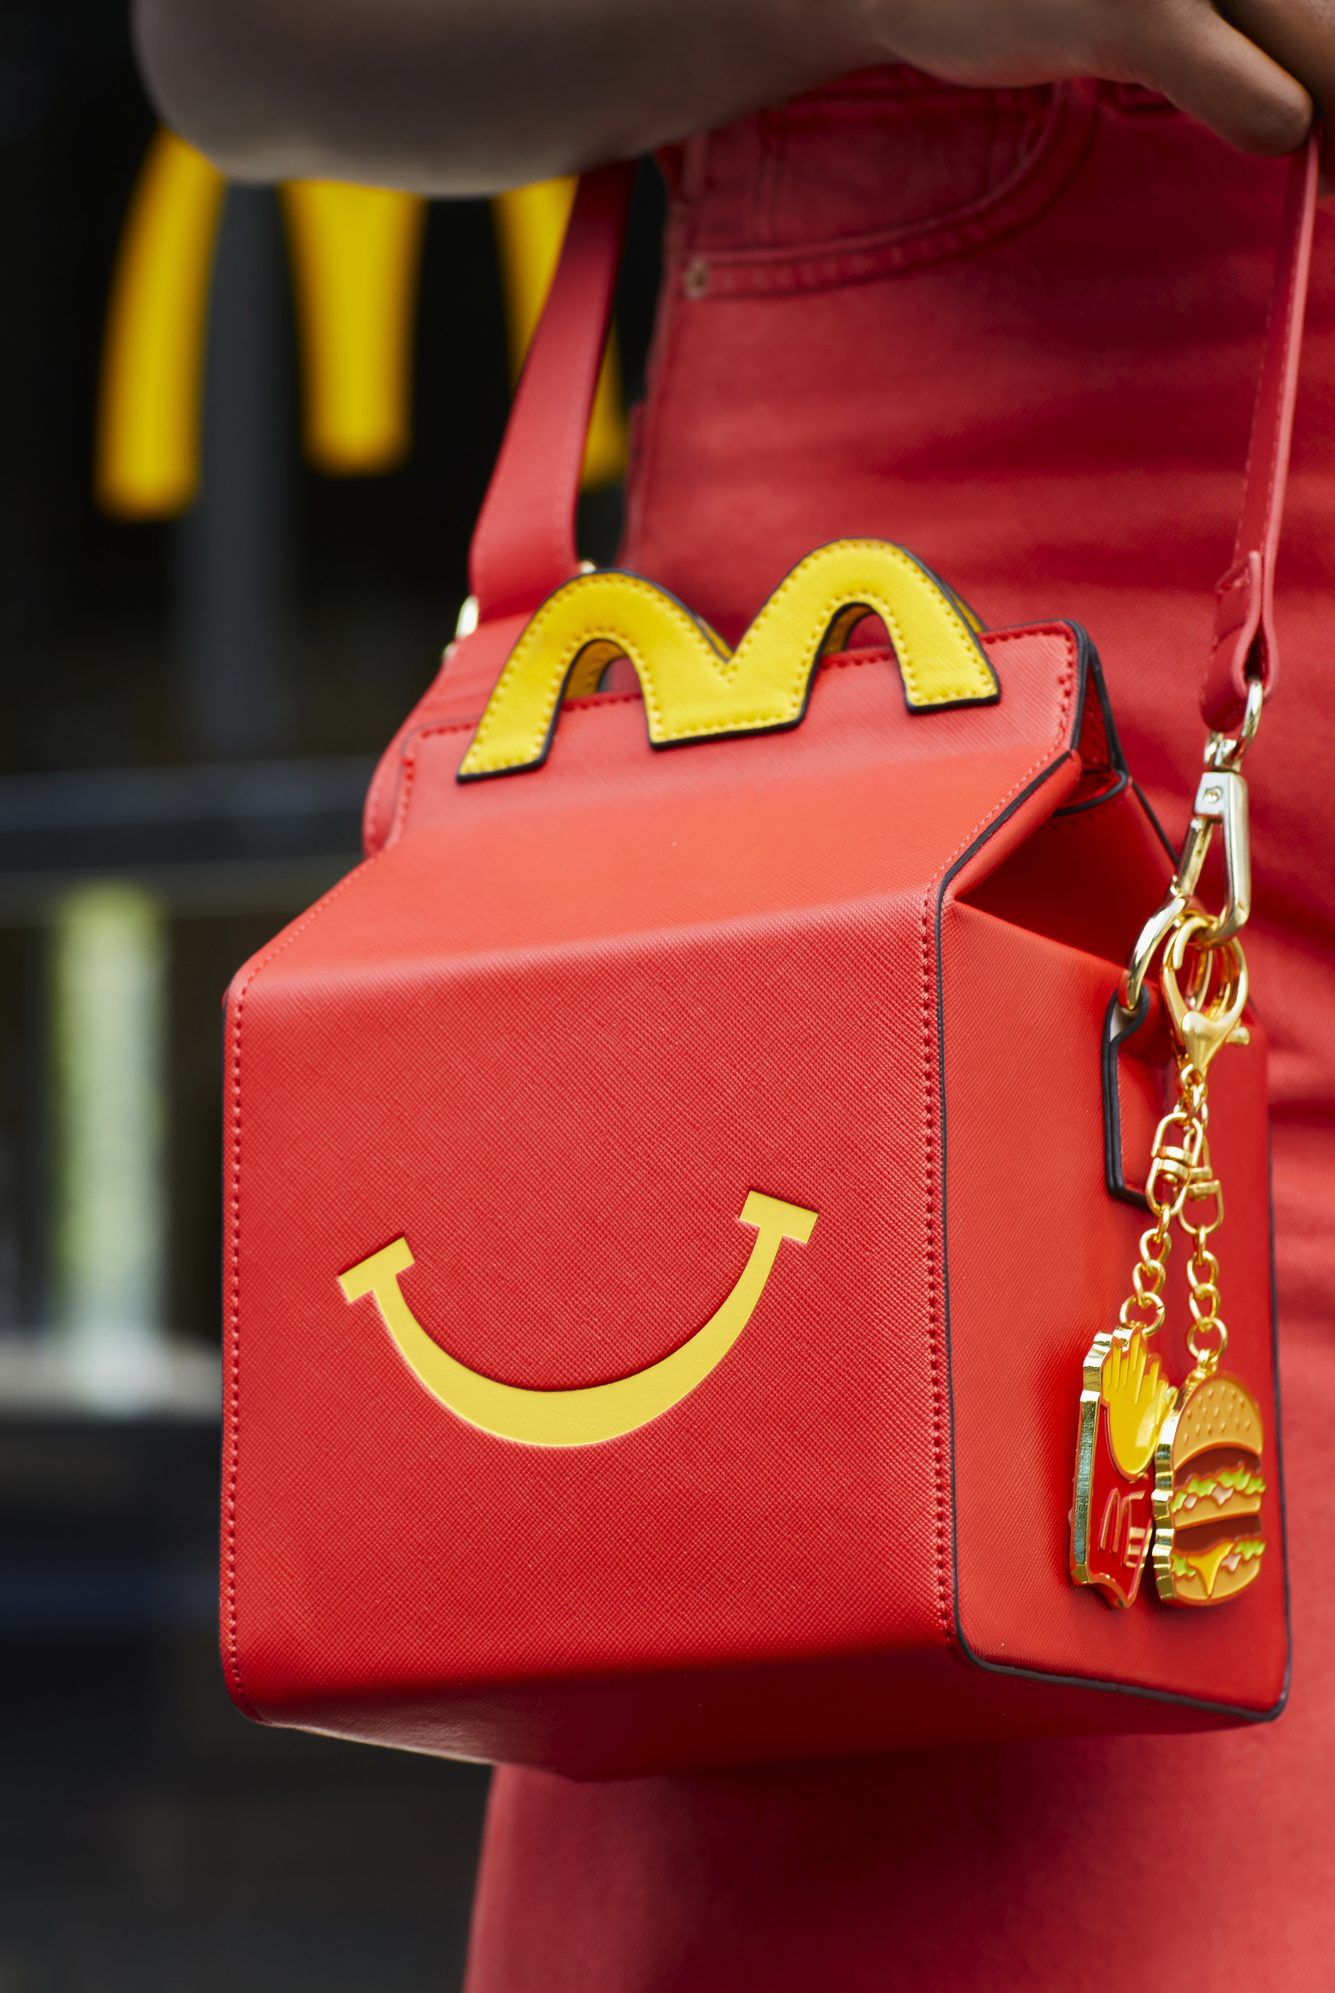 McDonalds Boxlunch Collab image #2